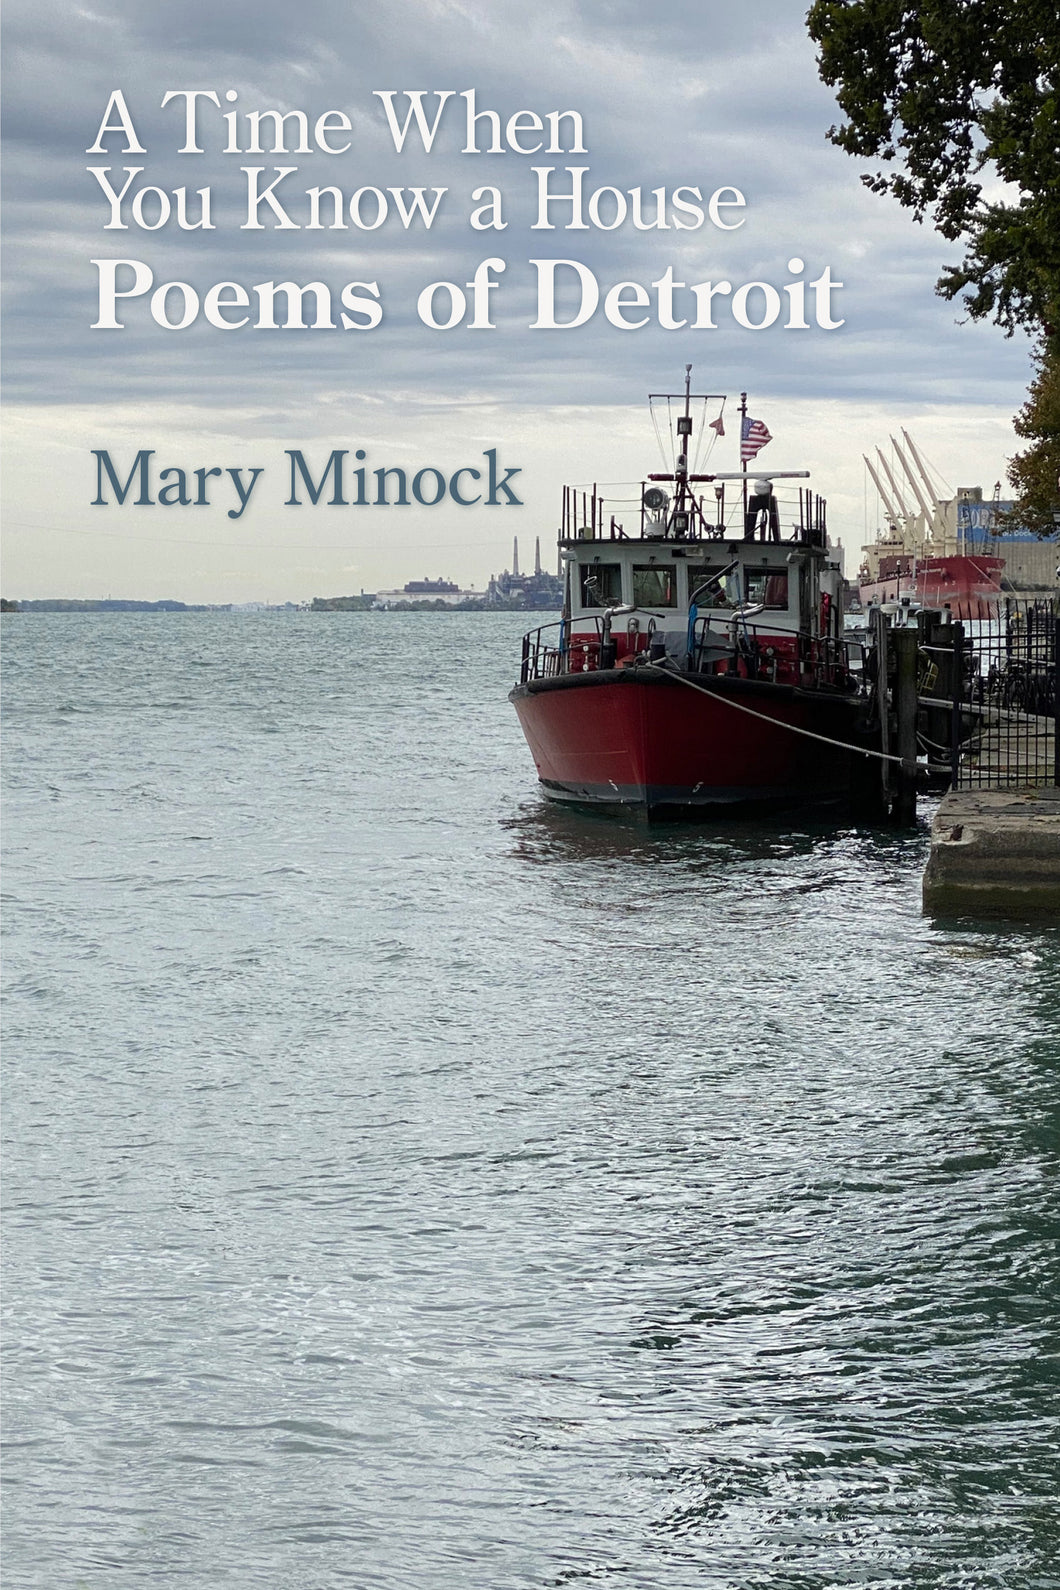 A Time When You Know a House: Poems of Detroit